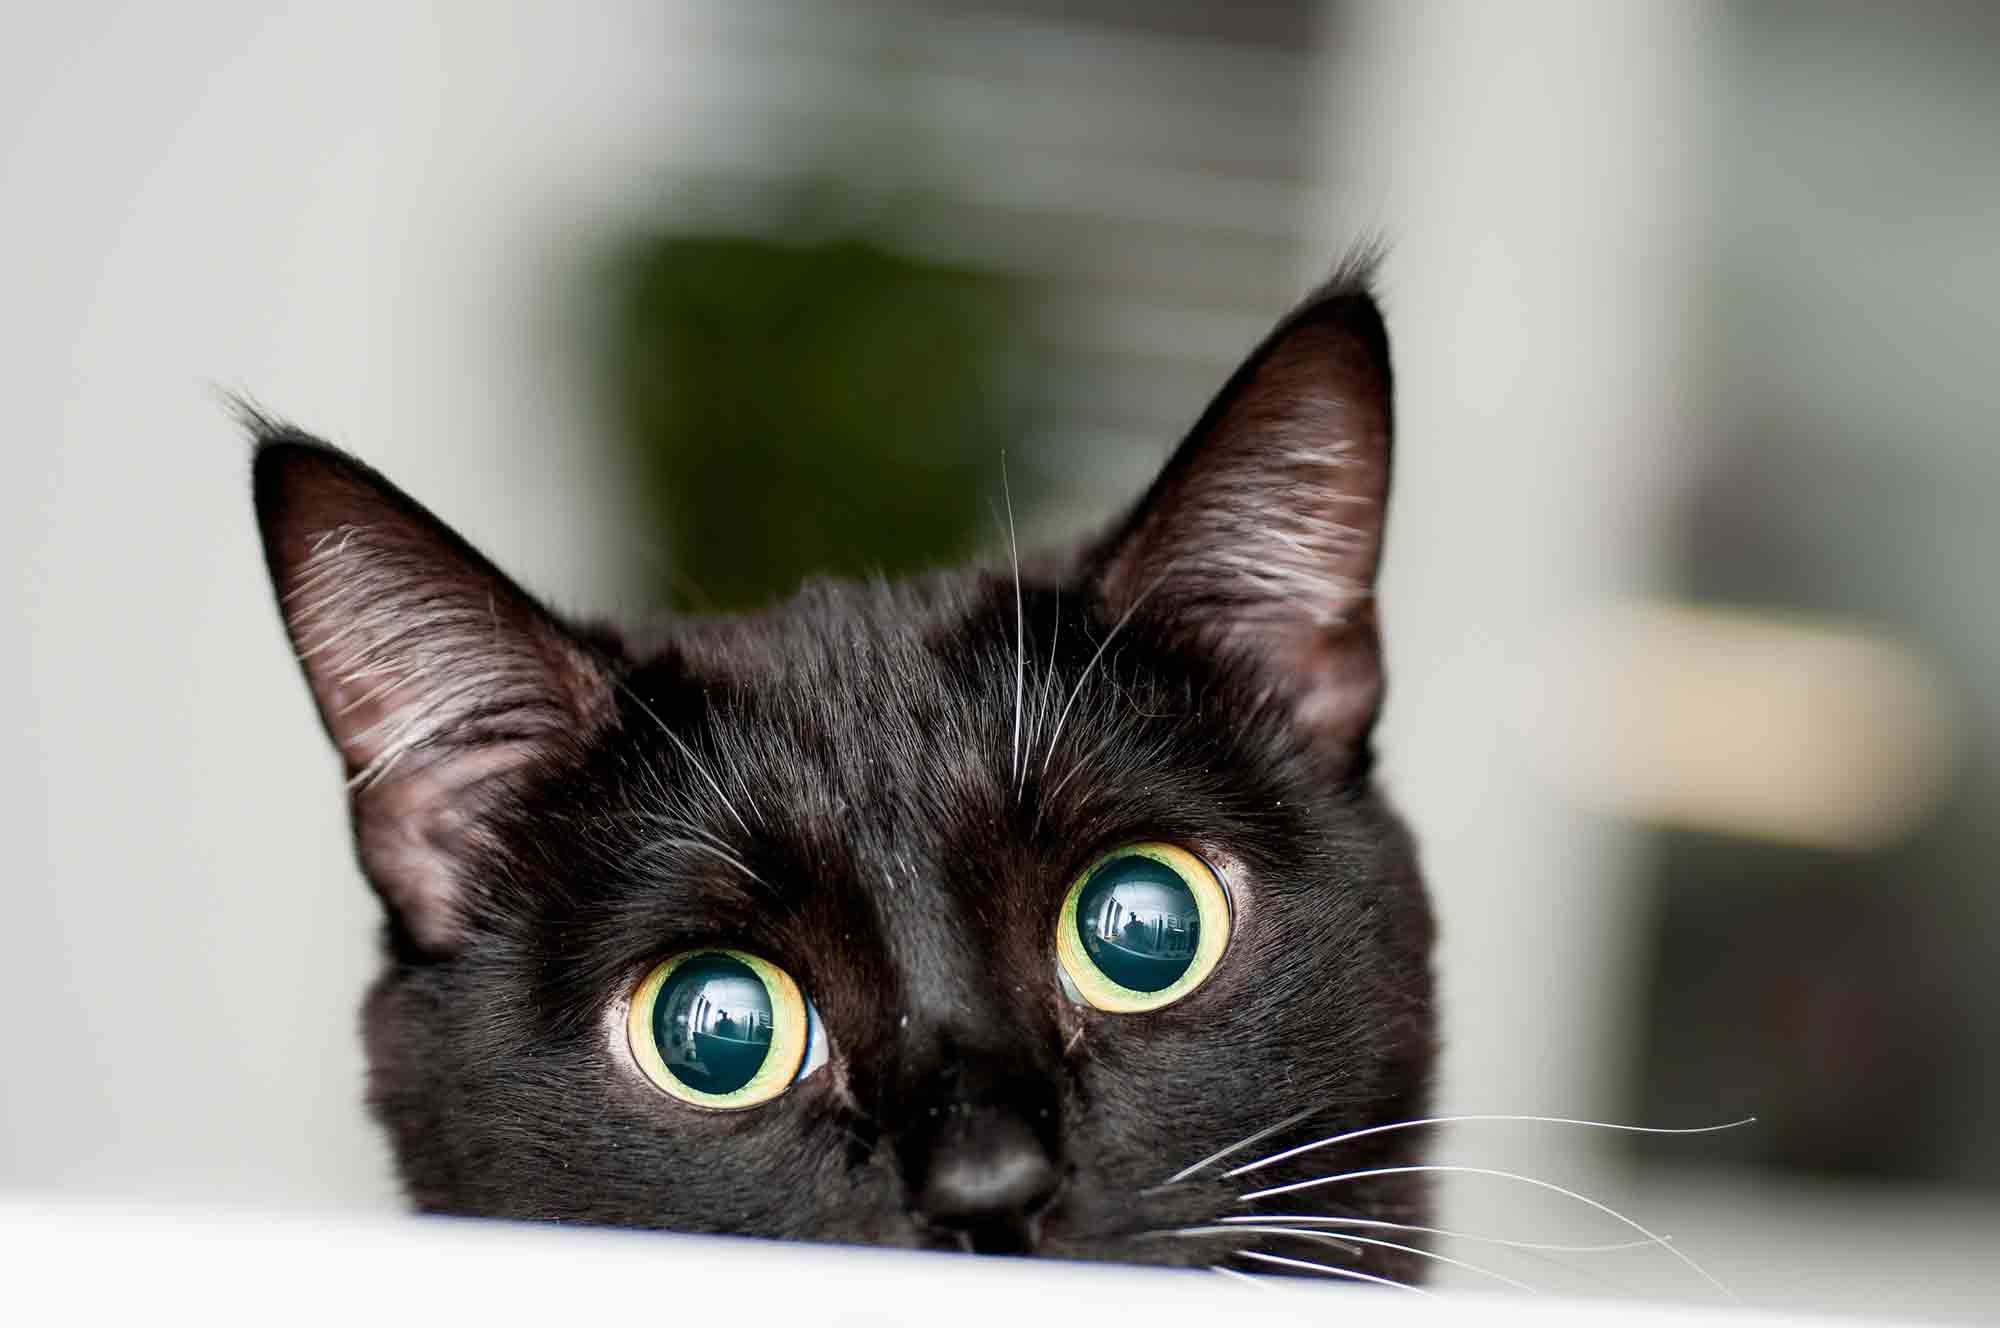 A black cat, with wide eyes, peeks up at the camera.